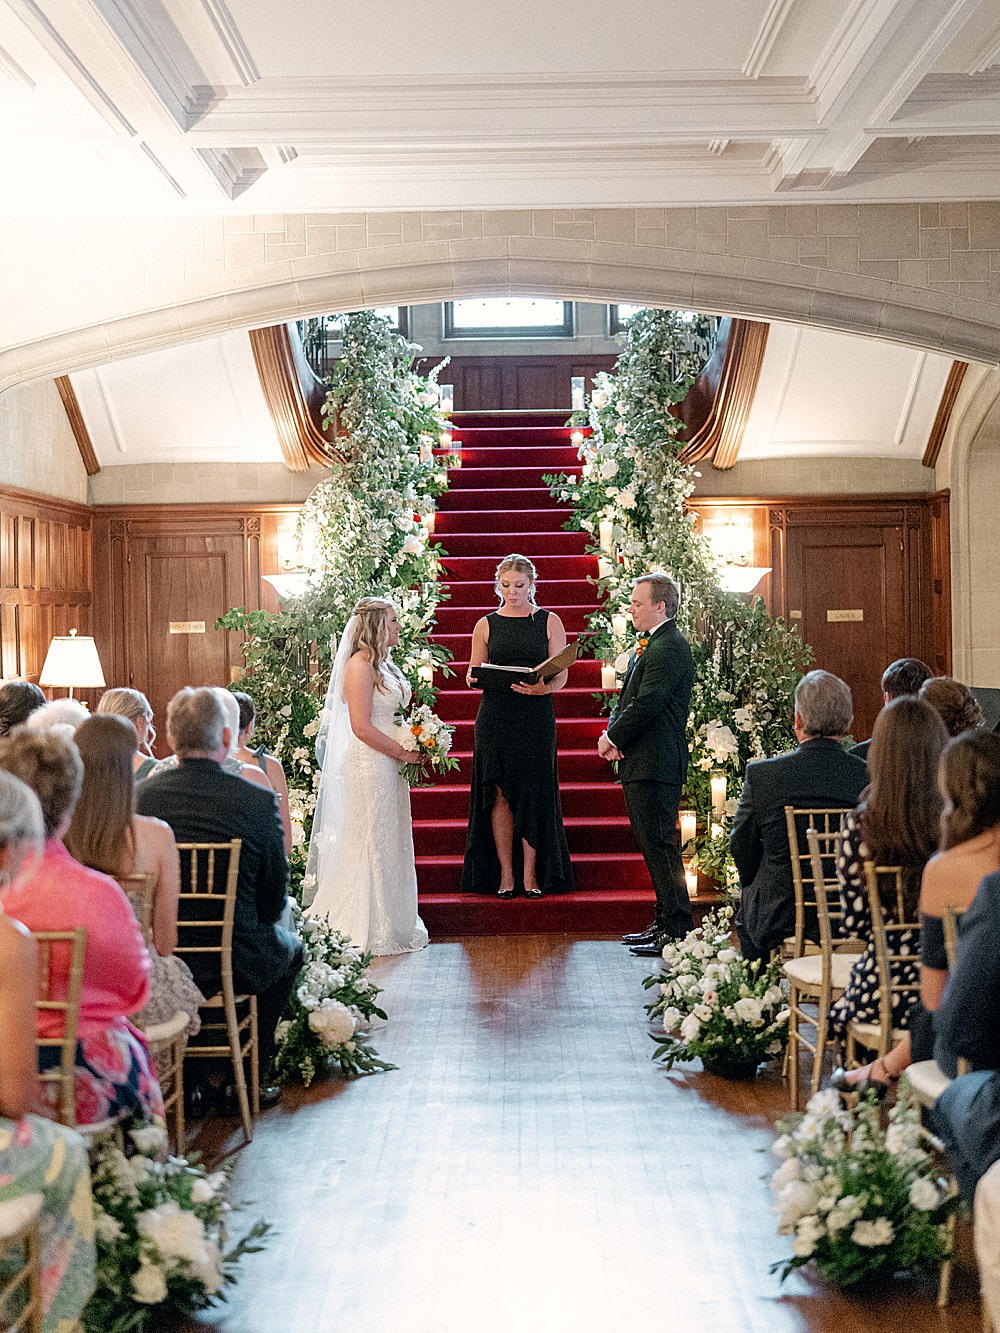 Indoor wedding ceremony in front of staircase at Callanwolde Fine Arts Center